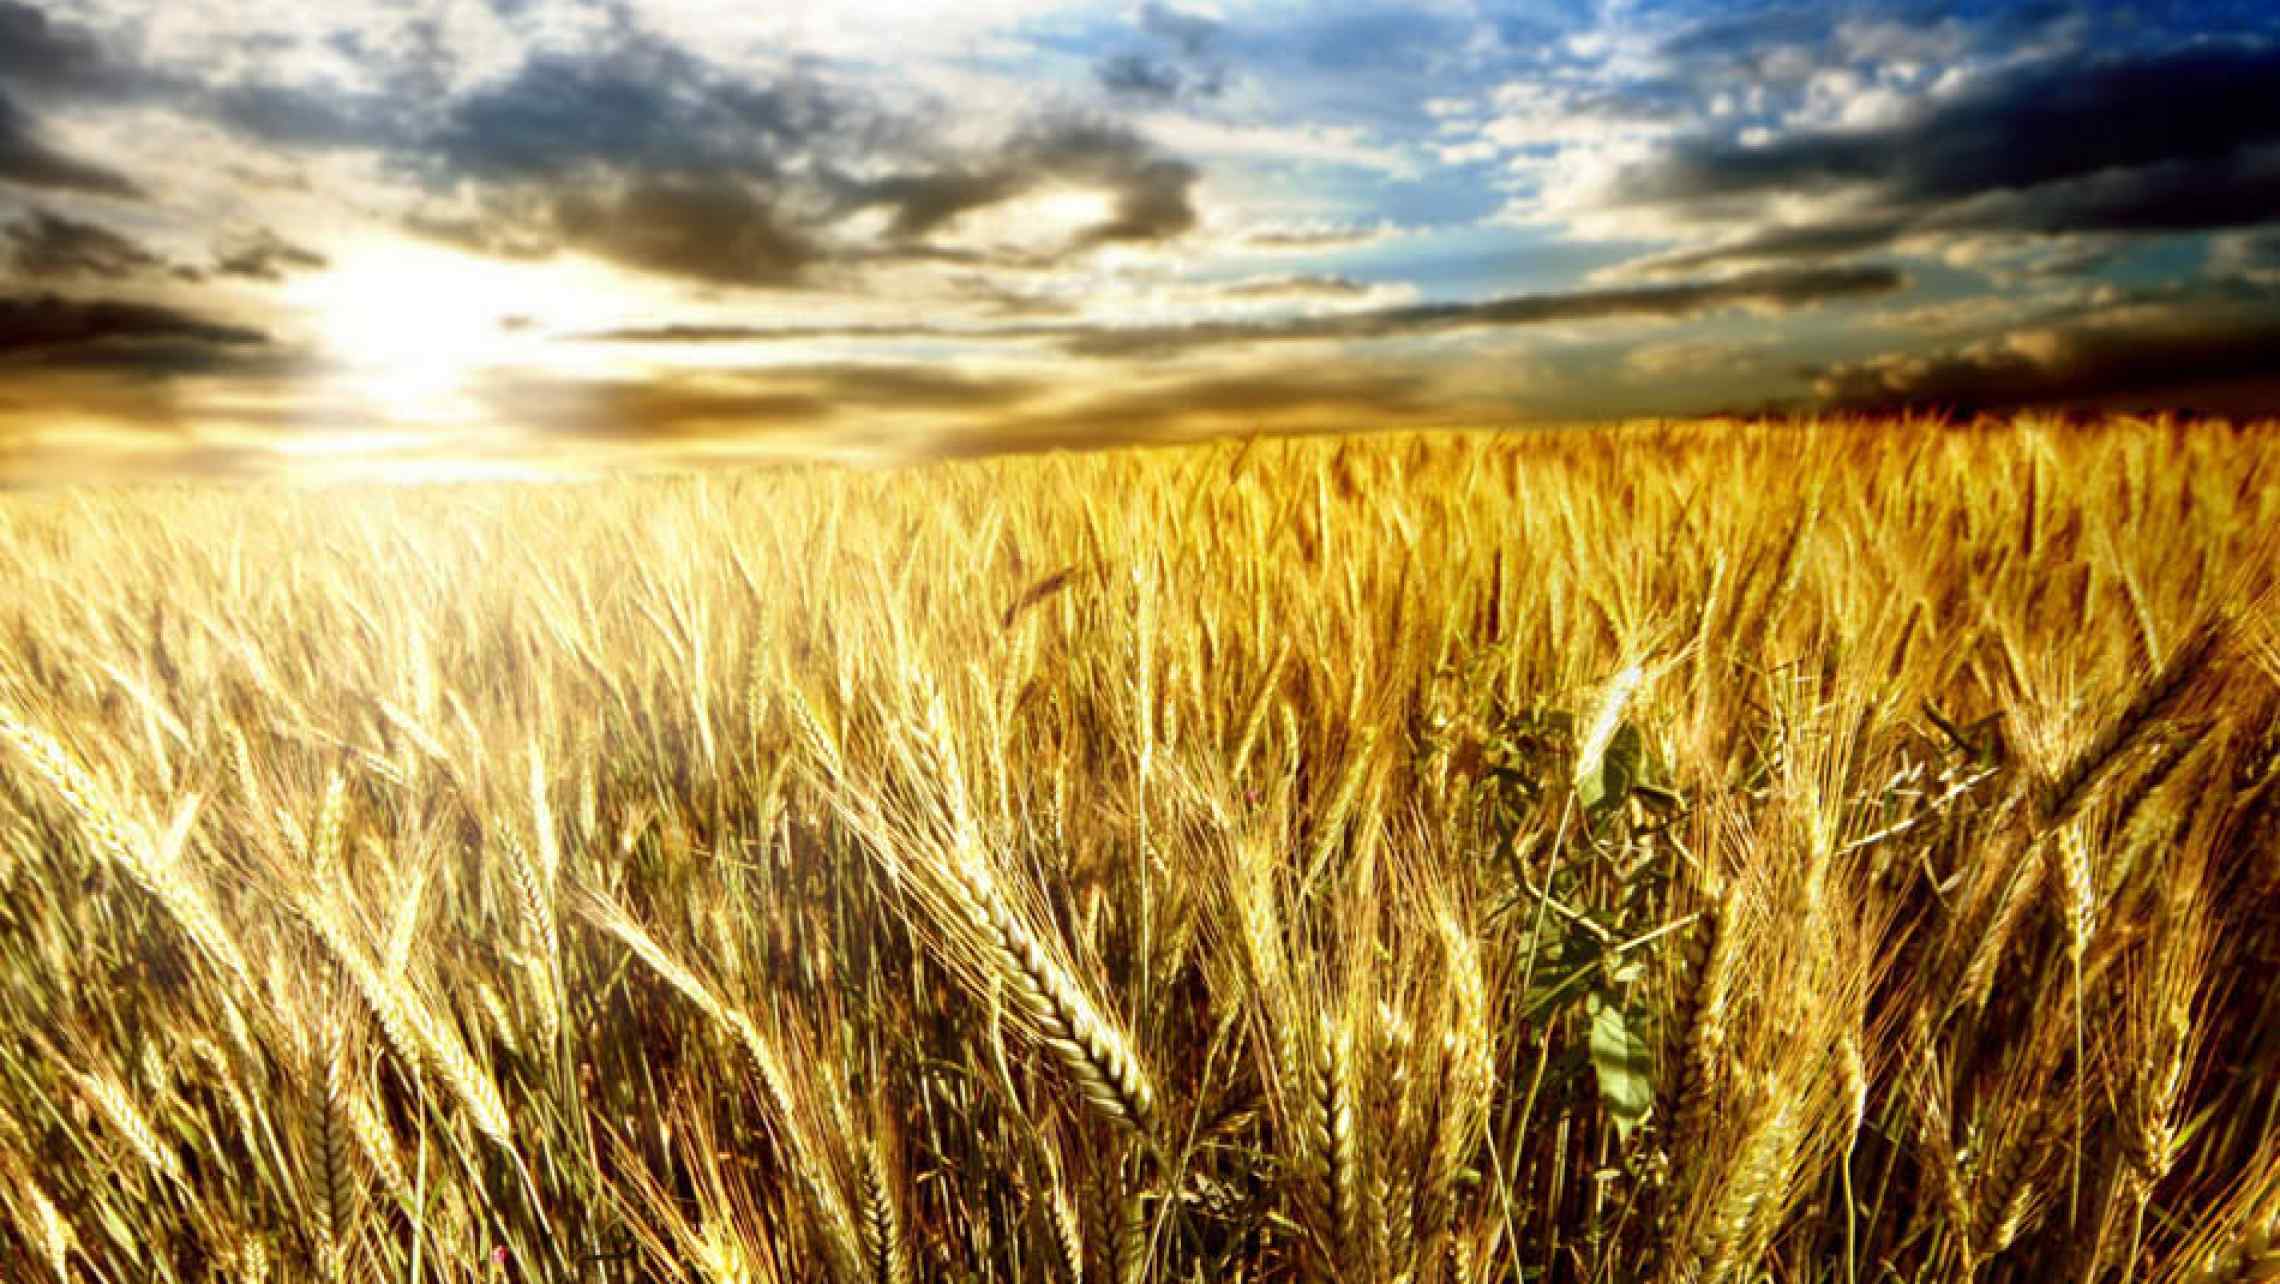 NEWLY-DECODED WHEAT GENOME OPENS THE DOOR TO ENGINEERING SUPERFOODS